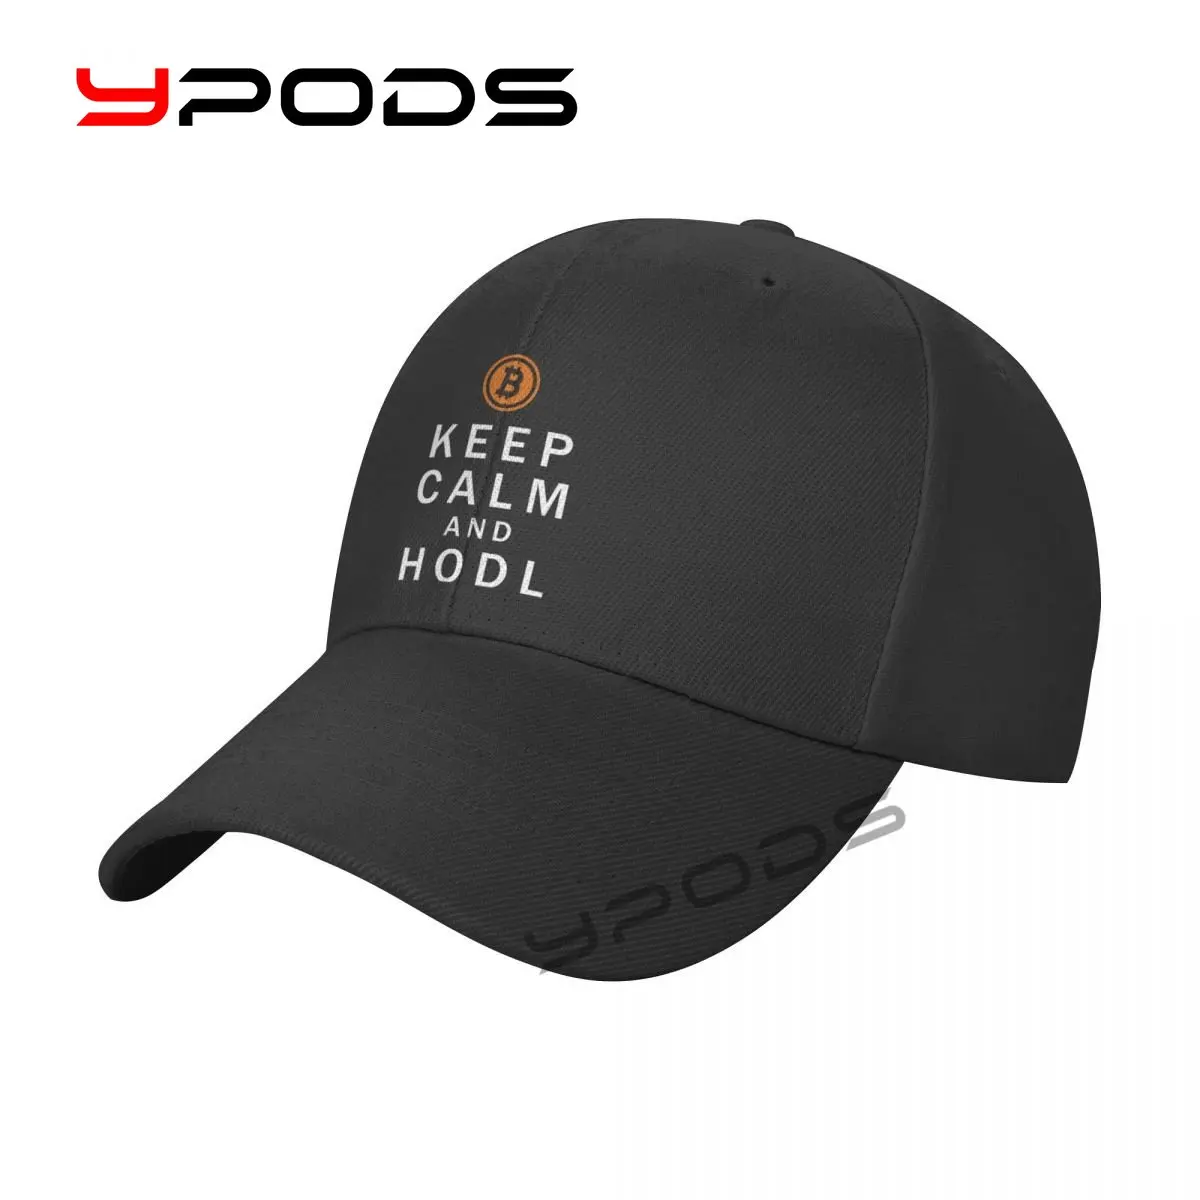 

Outdoor Sport Baseball Cap Keep Calm And HODL Spring And Summer Fashion Adjustable Men Women Fashion Caps